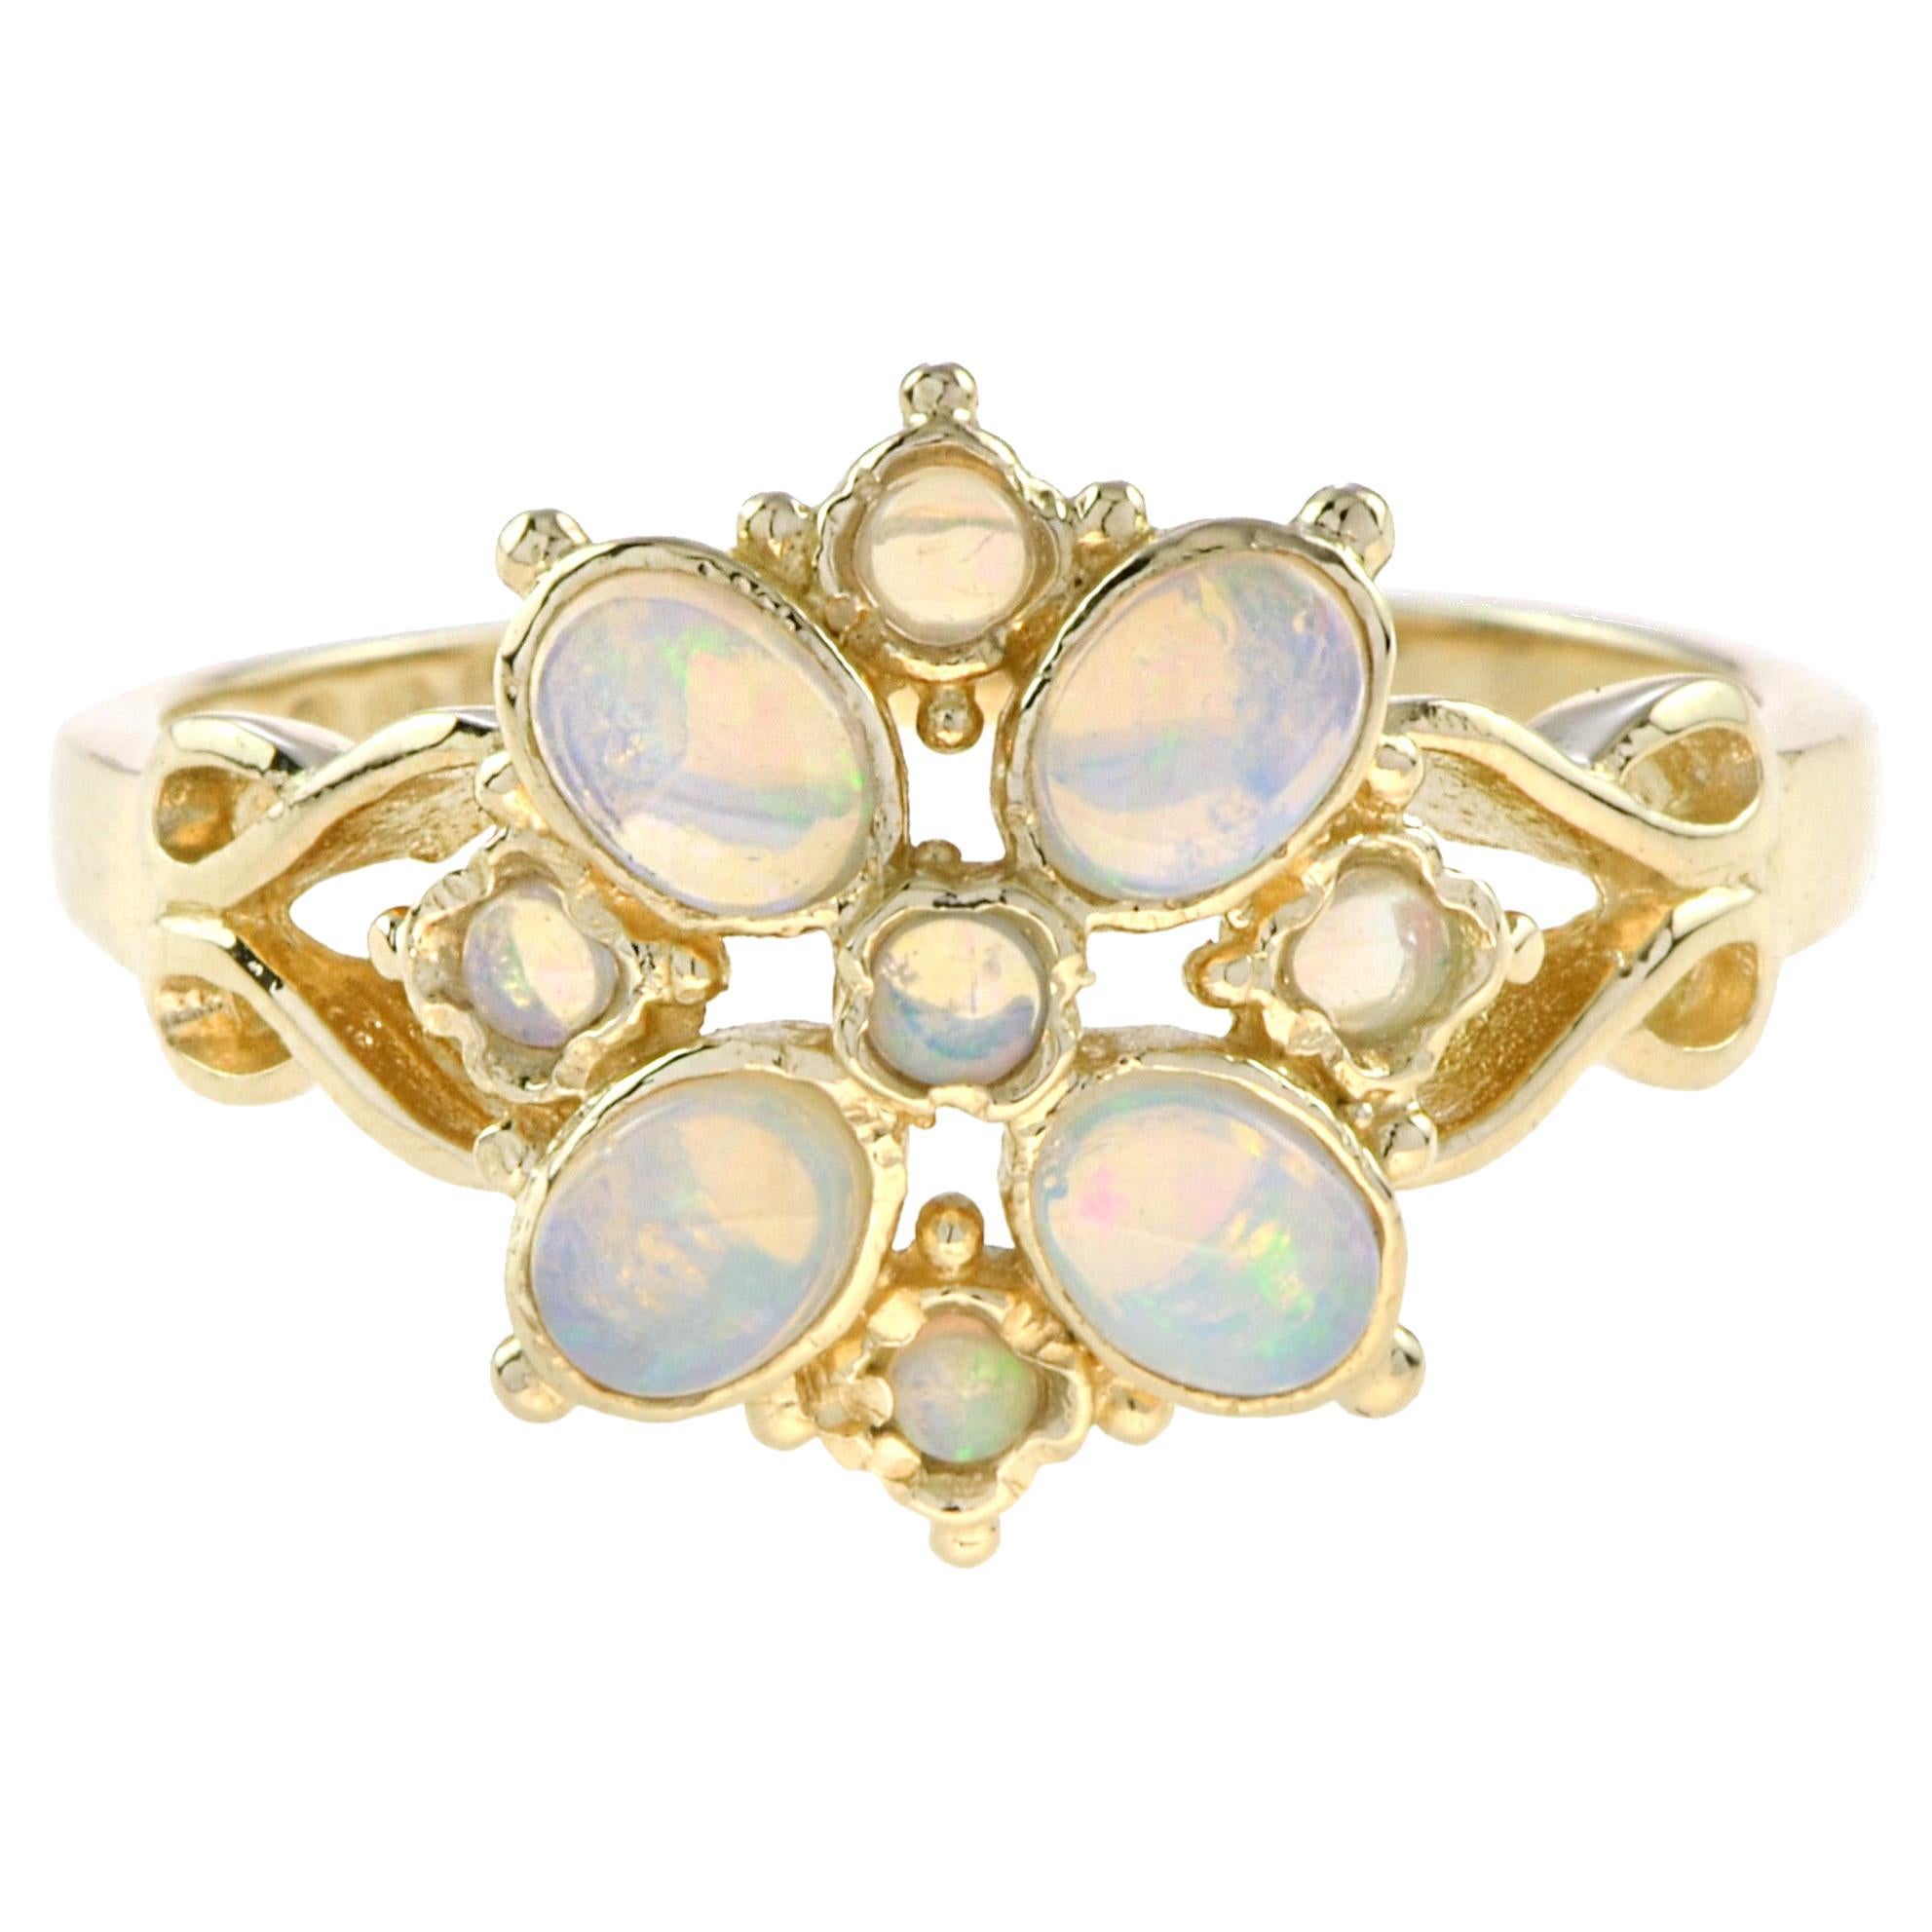 Vintage Style Natural Opal Flower Ring in 14K Yellow Gold